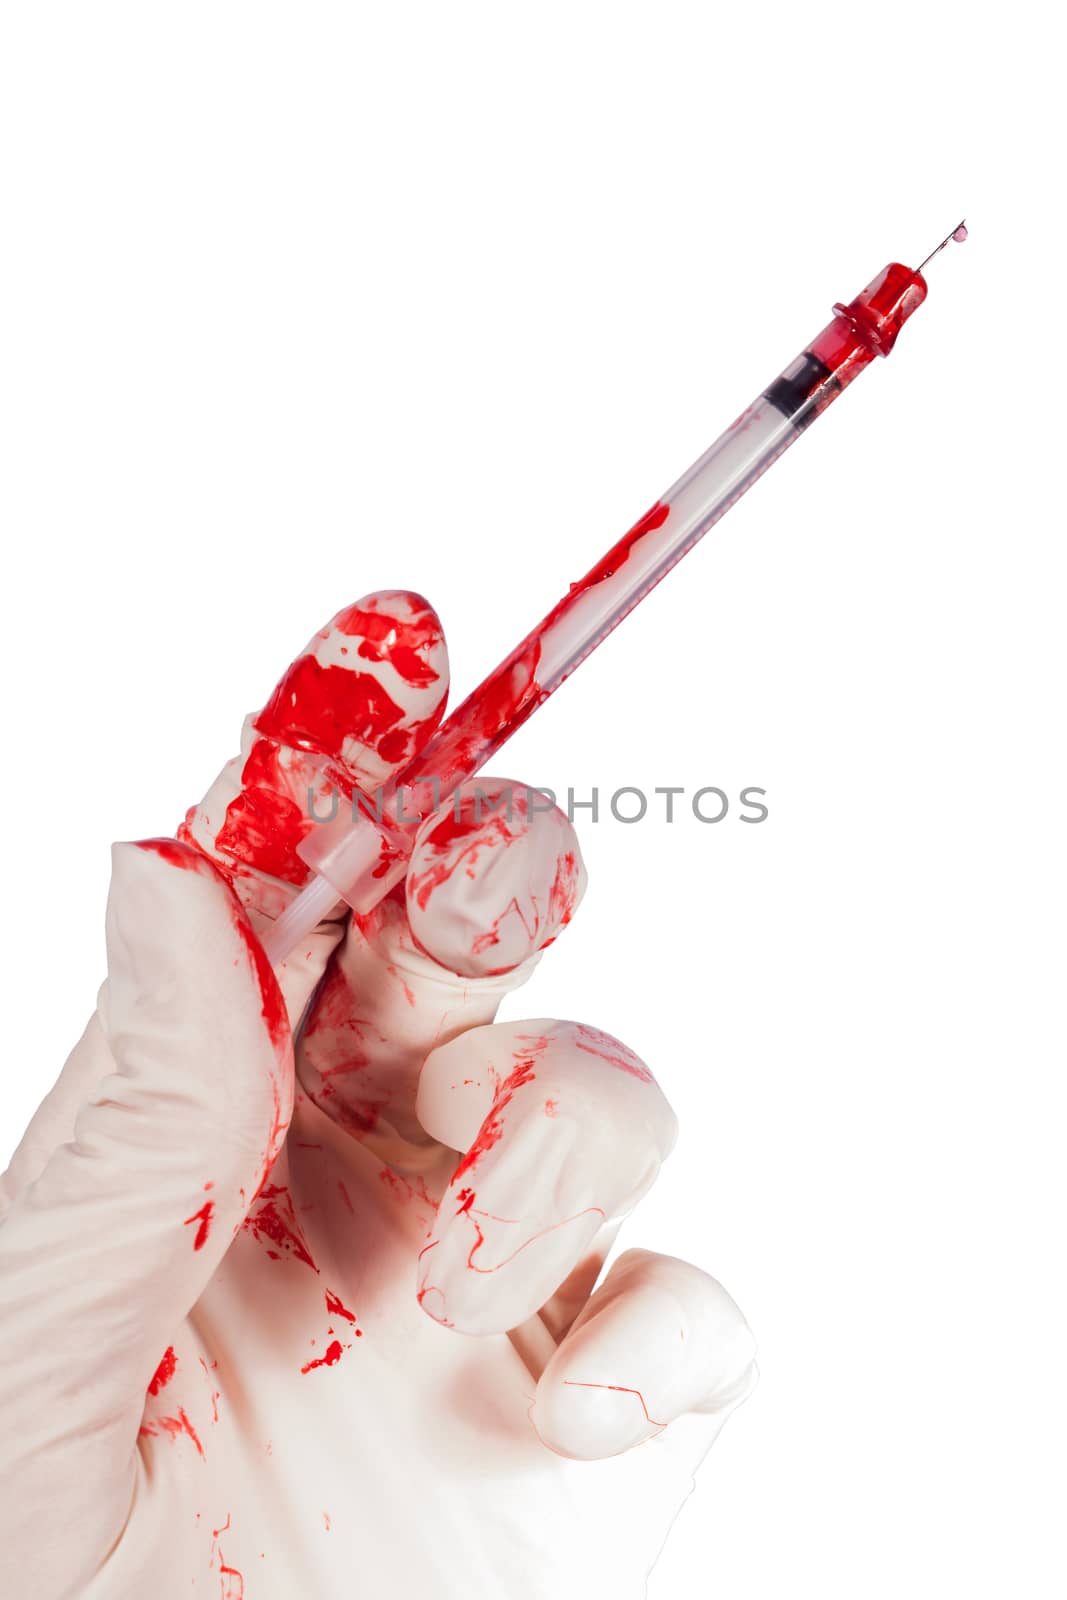 Bloody gloved hand holding a syringe by juniart